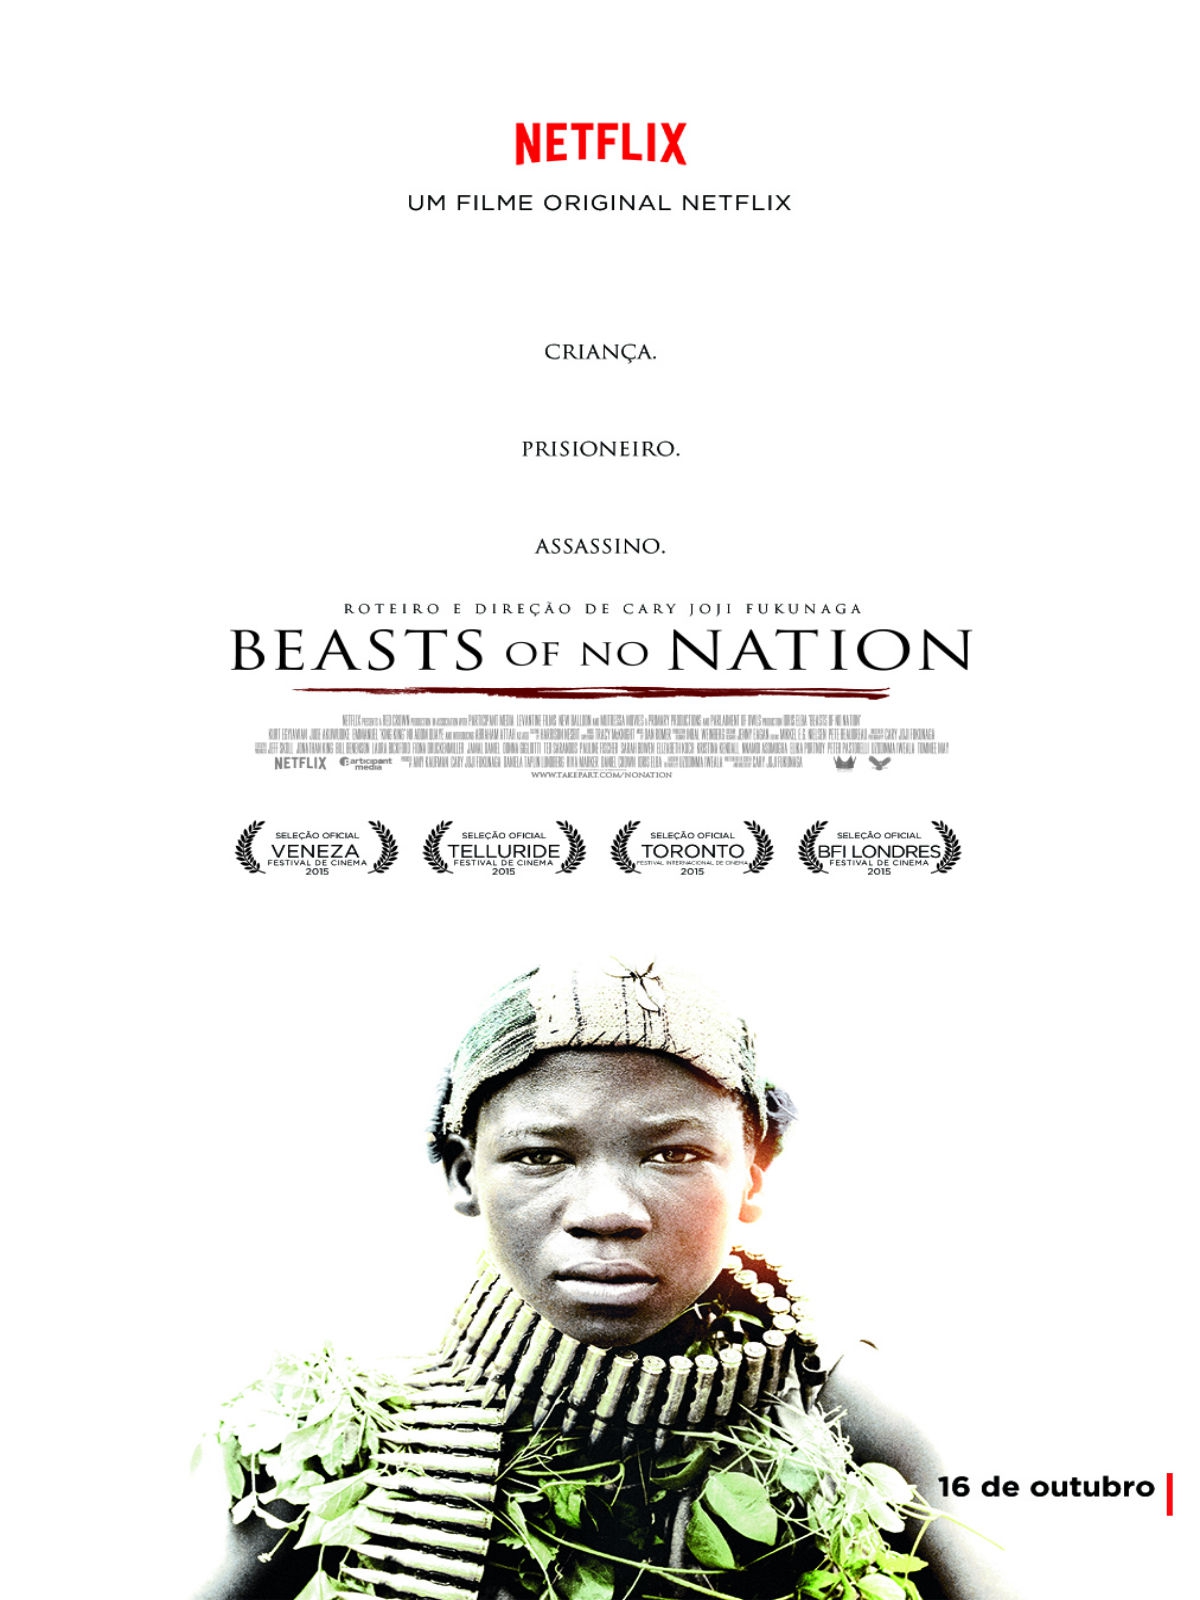  Beasts of No Nation  (2015) Poster 